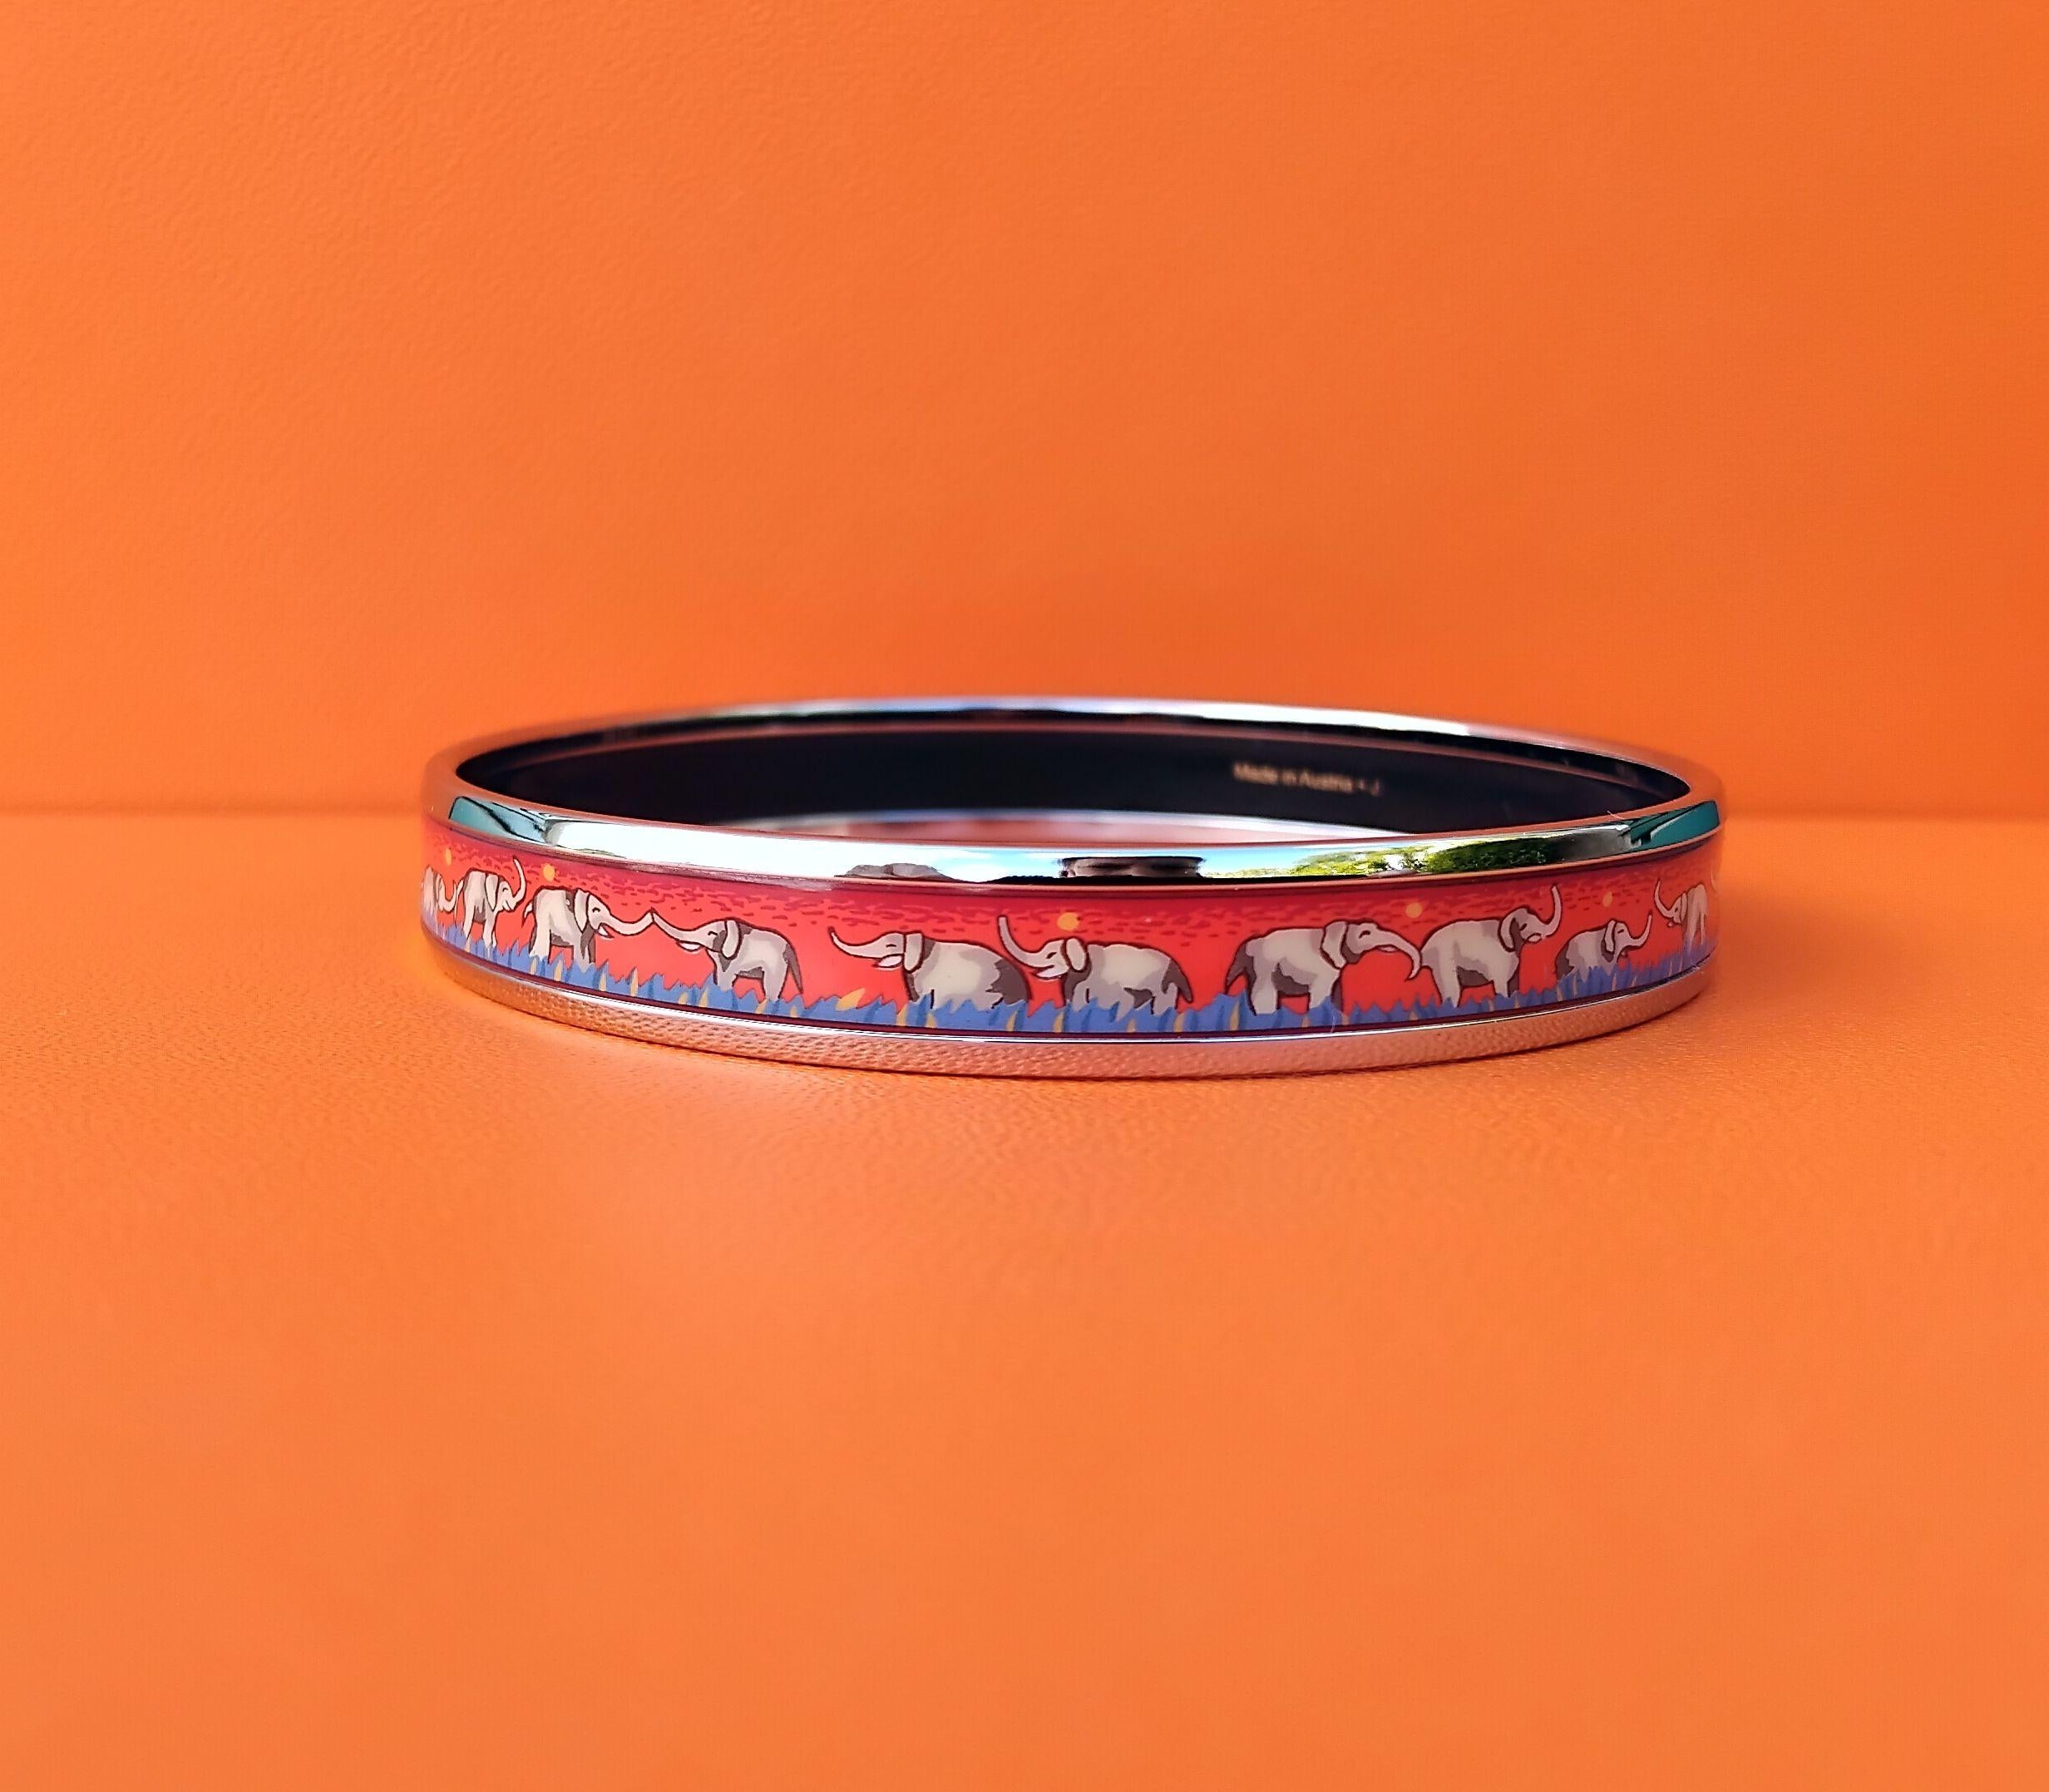 Super Cute Authentic Hermès Bracelet

Print: Elephants Grazing

Hard to find ! One of the most thought after Hermès Bracelet

Made in Austria + J

Made of printed enamel and new palladium plated hardware (silver-tone)

Colorways: Red background and